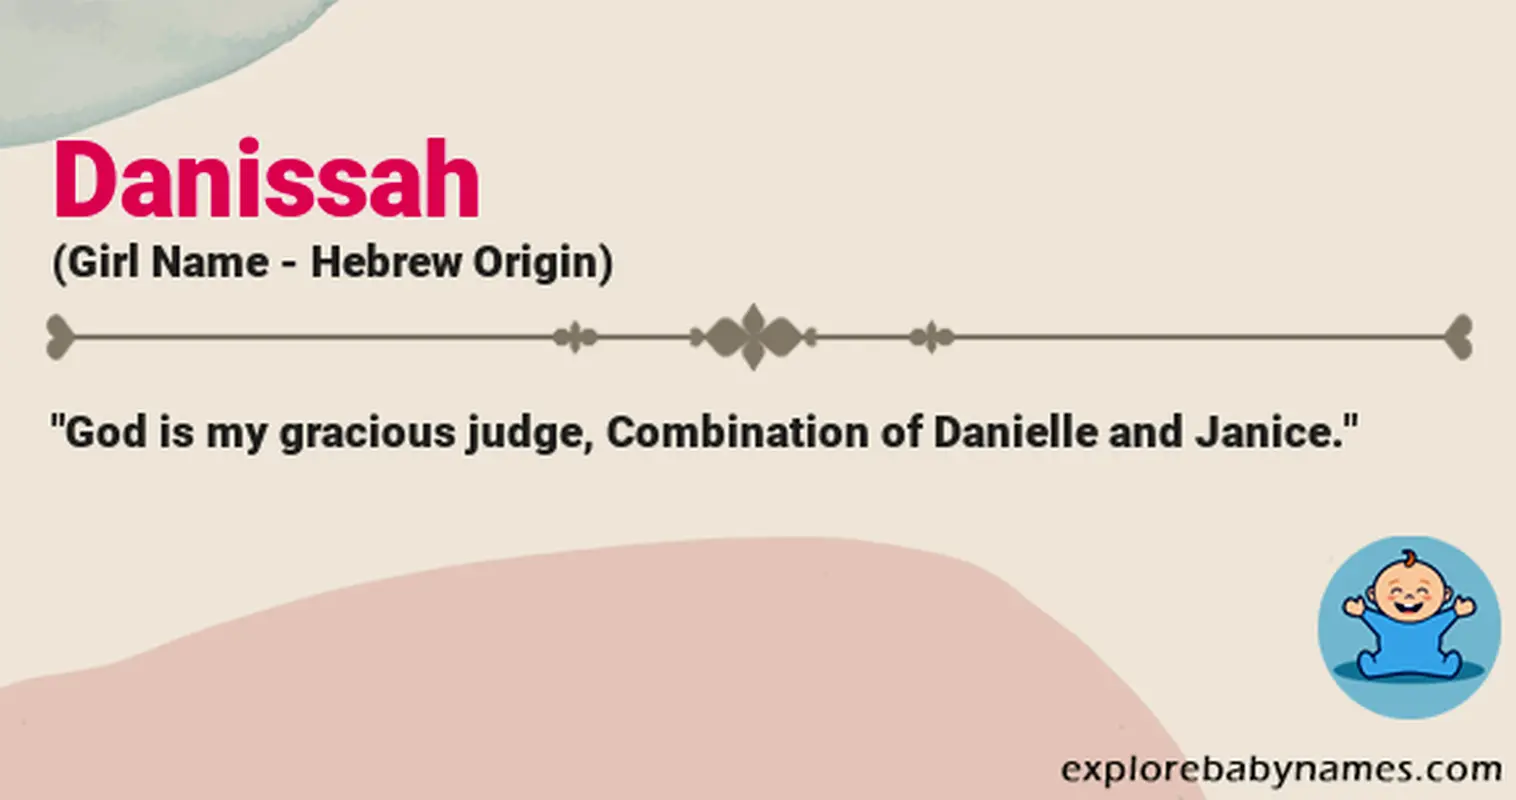 Meaning of Danissah